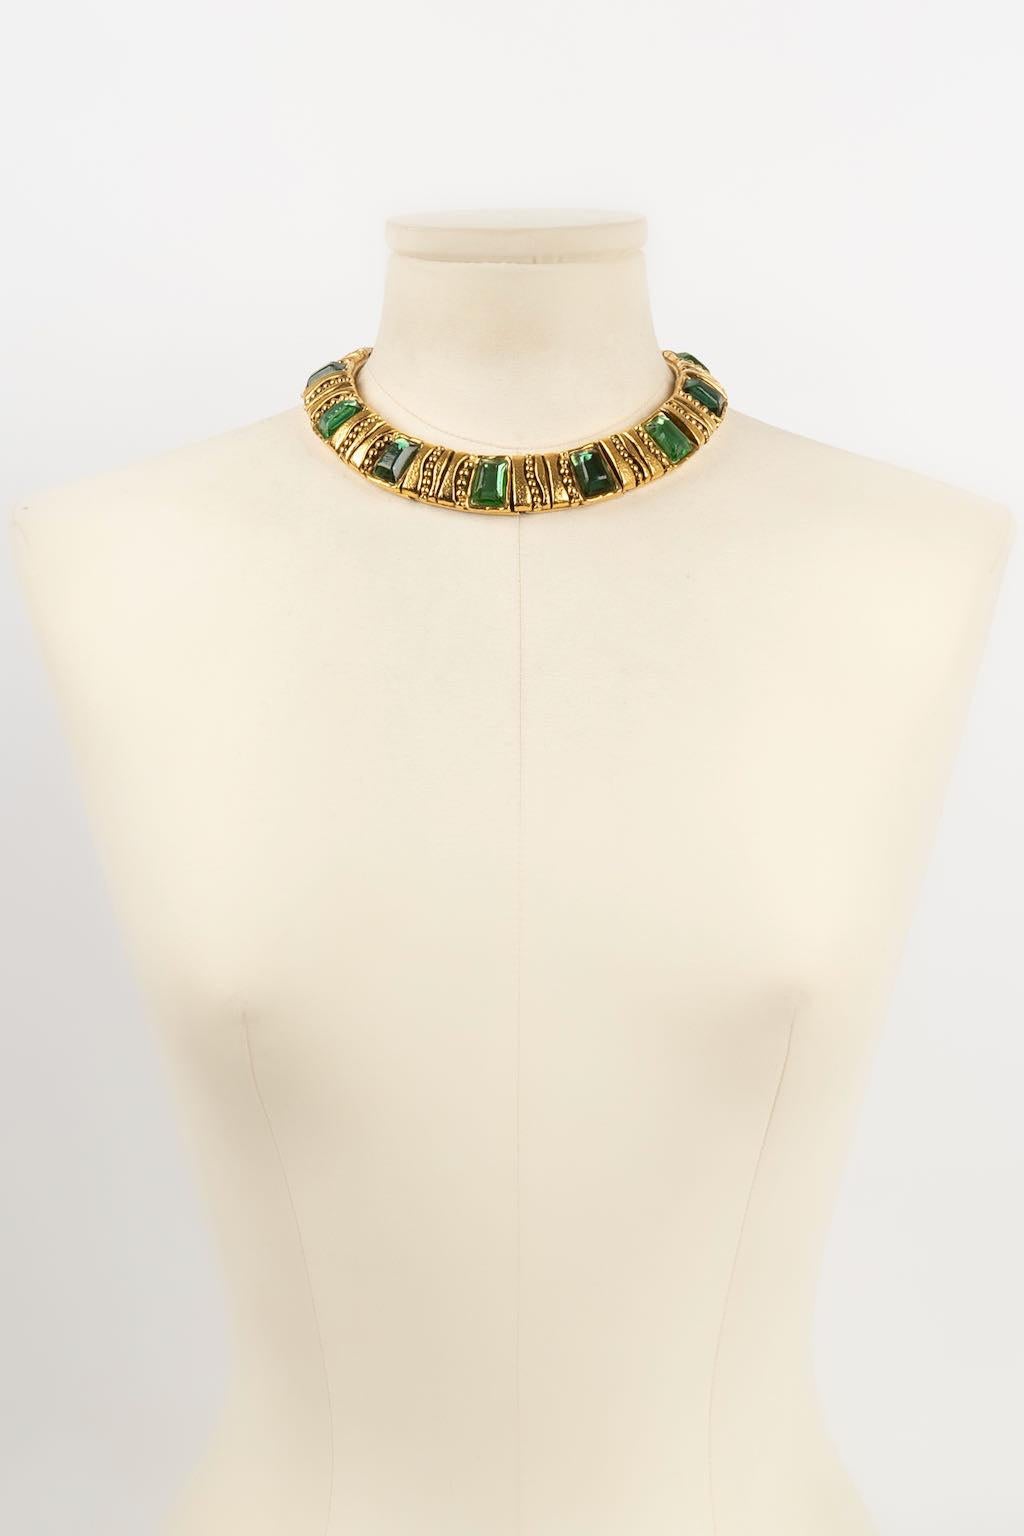 Jean Louis Scherrer -(Made in France) Short necklace in gold metal paved with green resin cabochons.

Additional information: 
Dimensions: Length: 44 cm
Condition: Very good condition
Seller Ref number: BC19